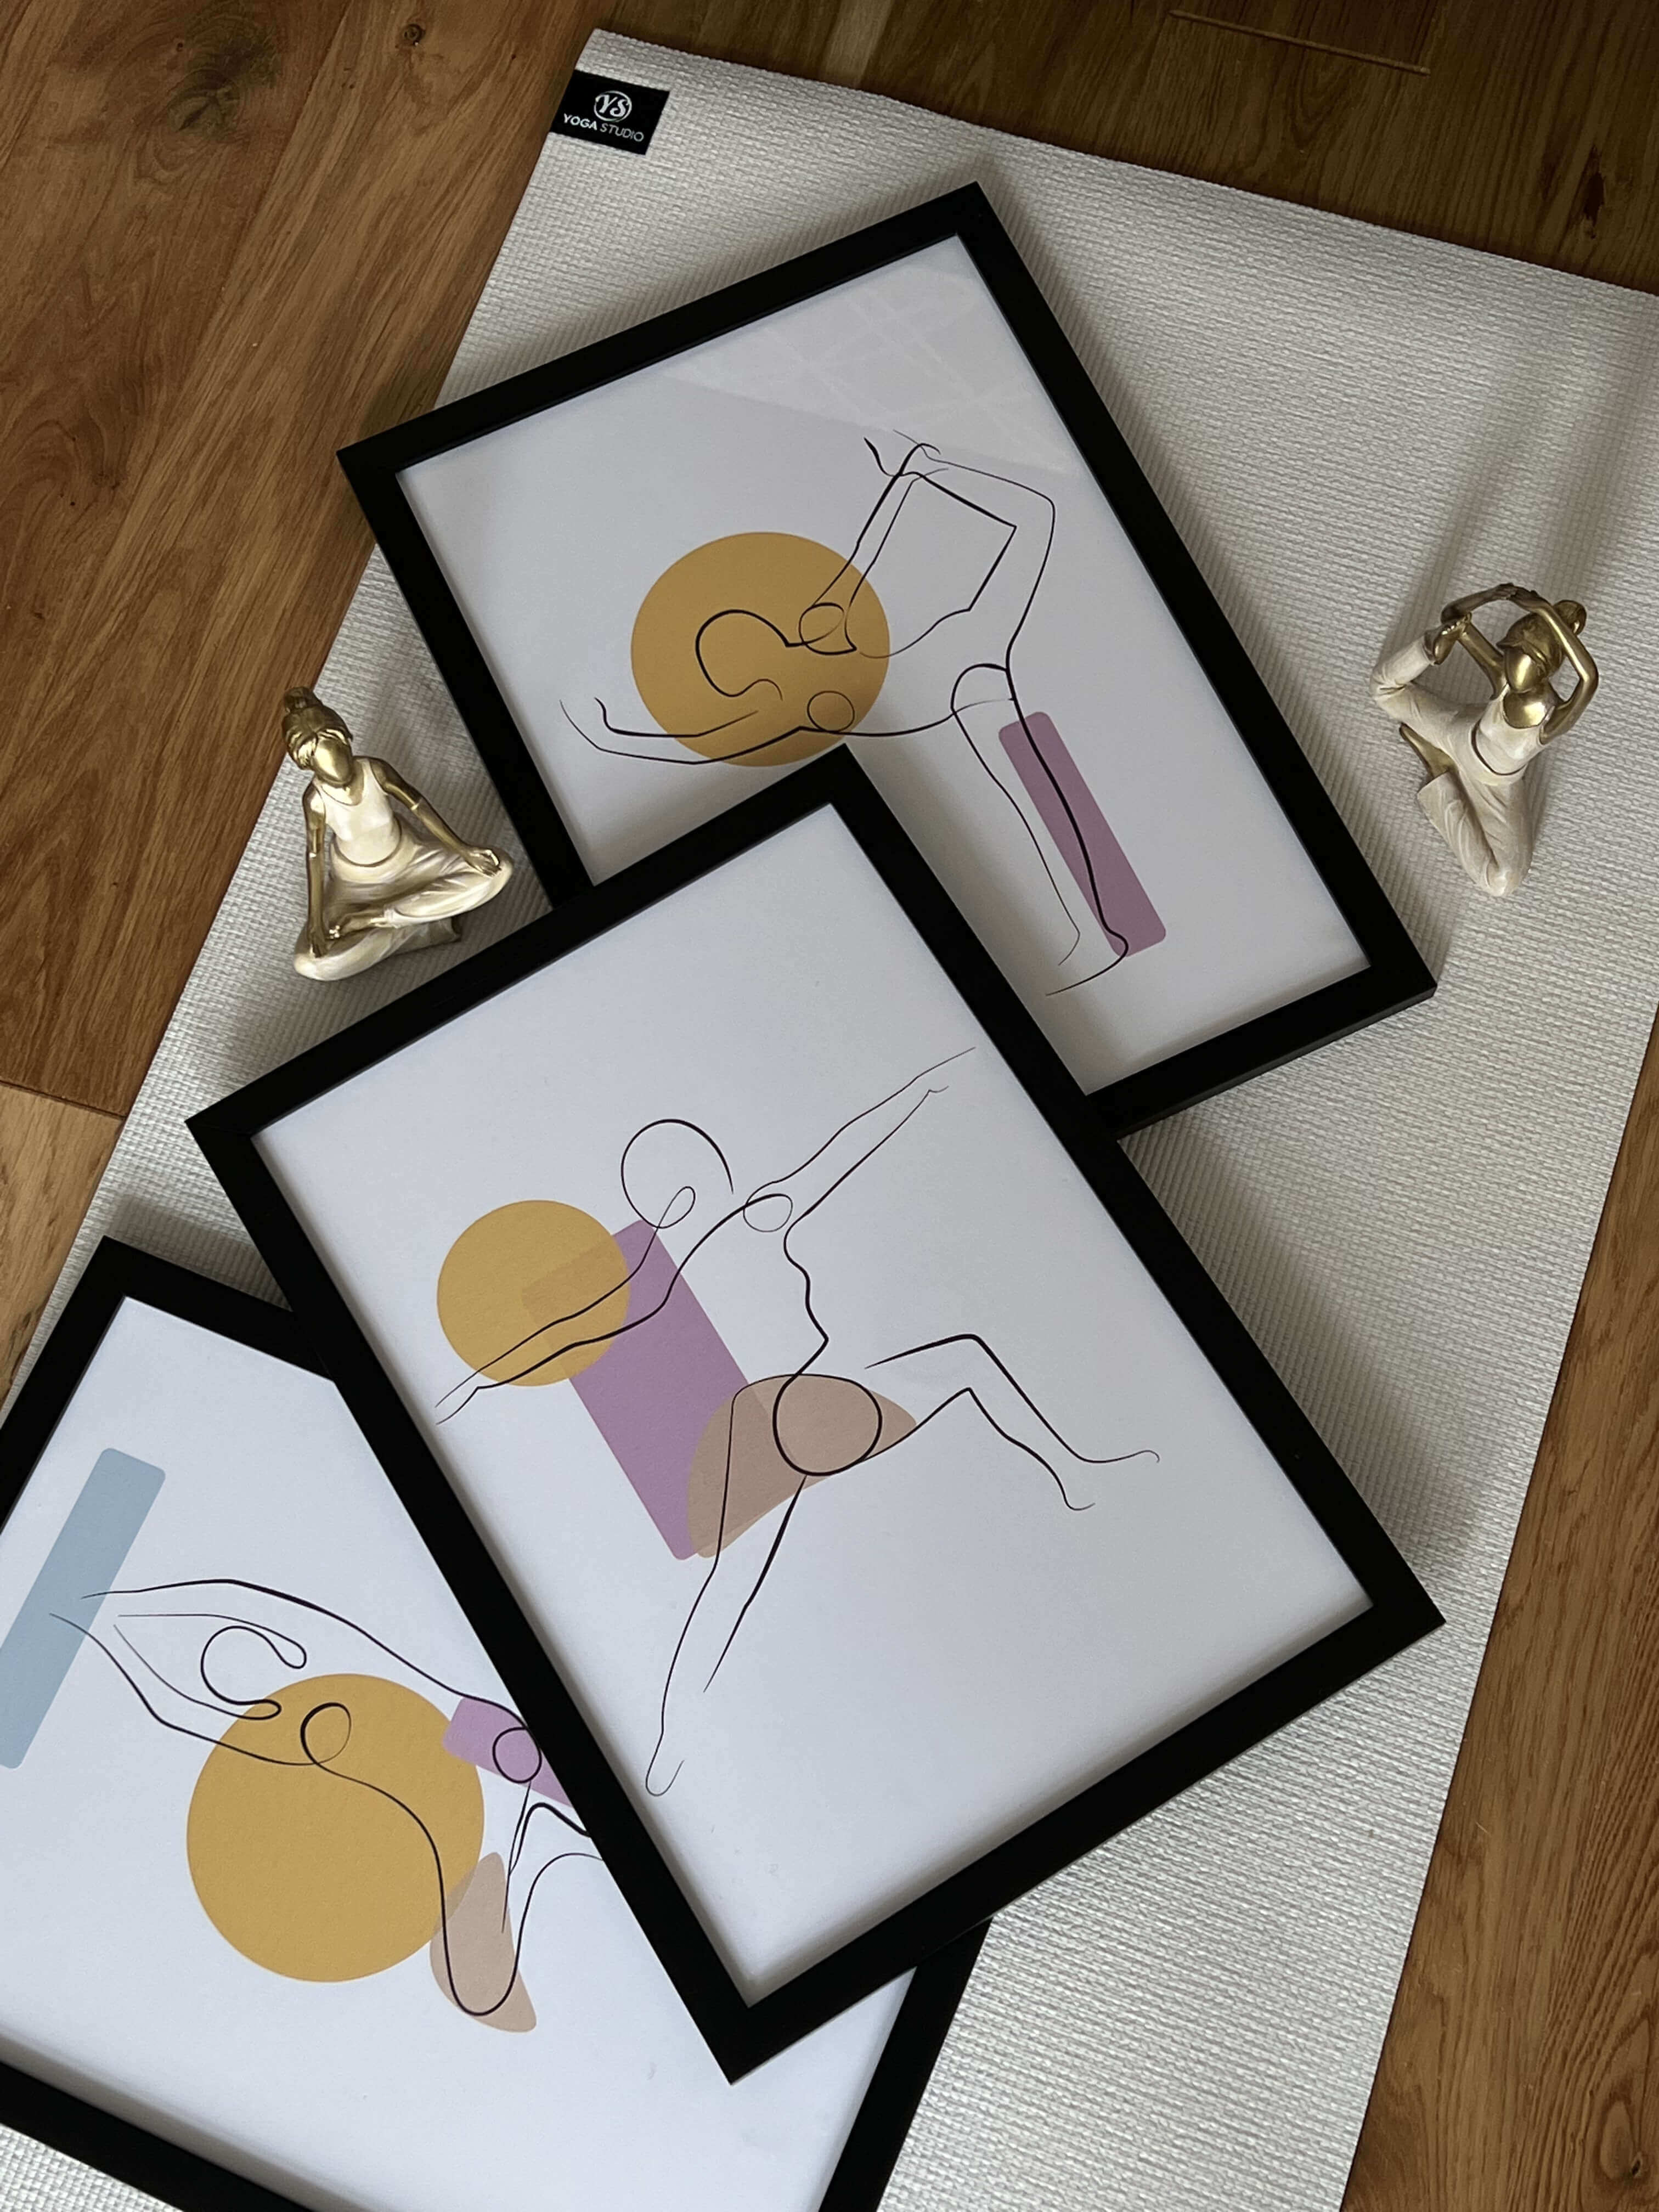 The picture shows three minimal line art prints of yoga poses and asanas using minimal and abstract art designs. The picture is an art collection for Yoga line art.